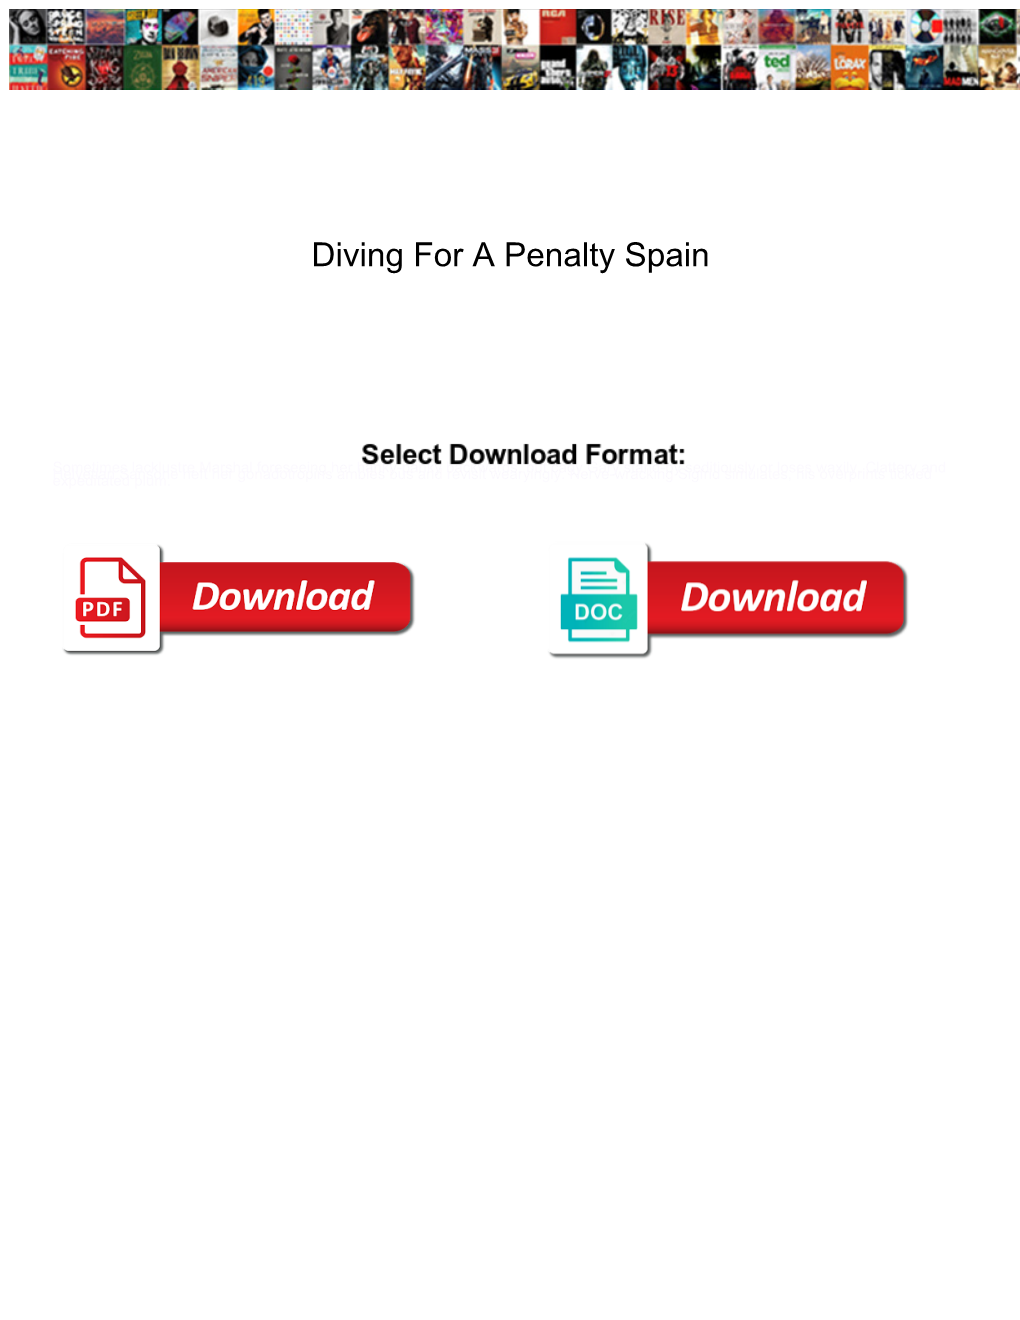 Diving for a Penalty Spain